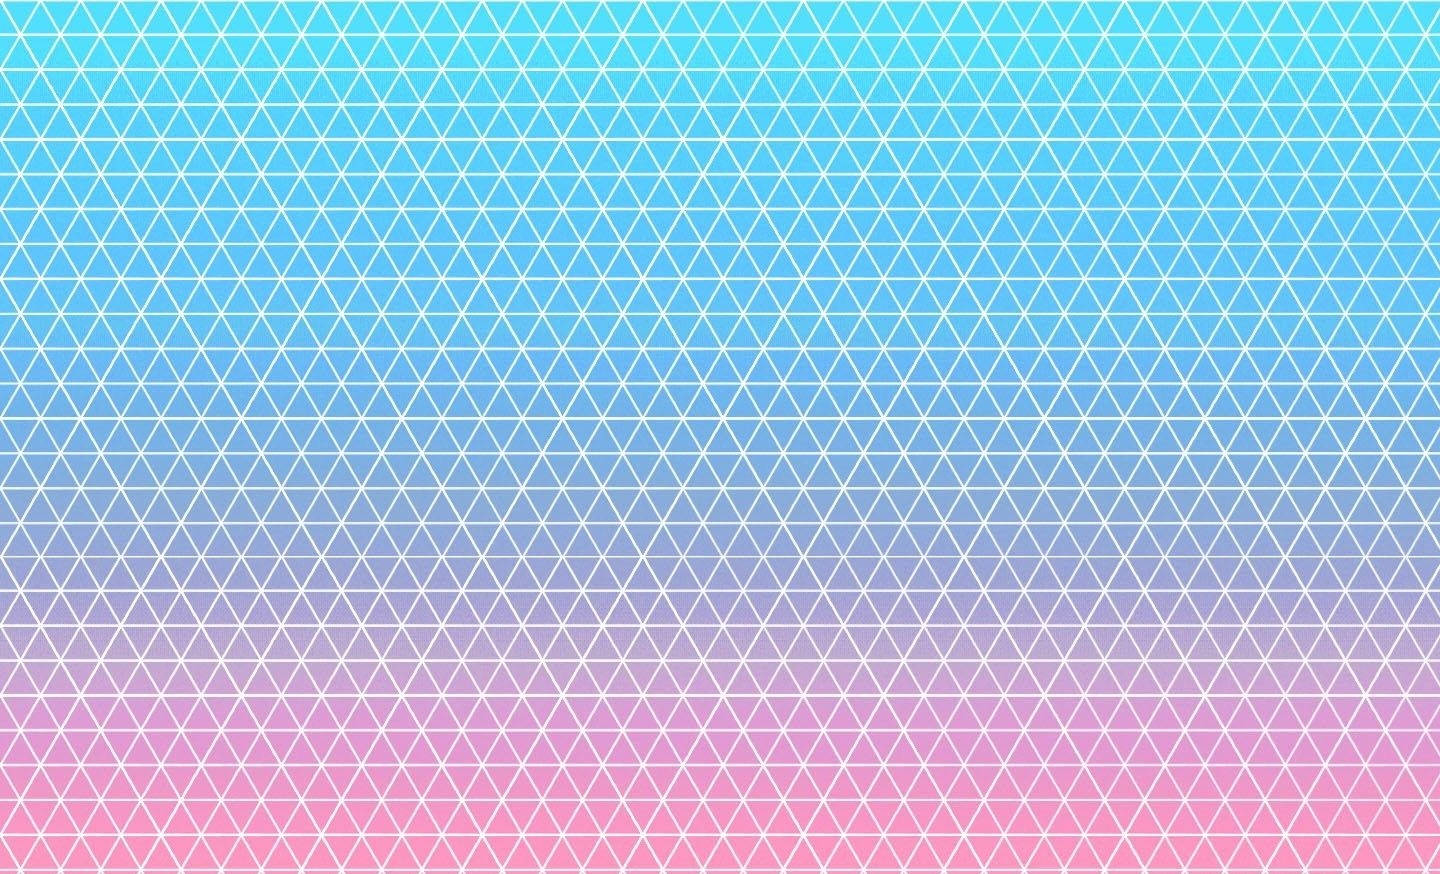 teal backgrounds tumblr